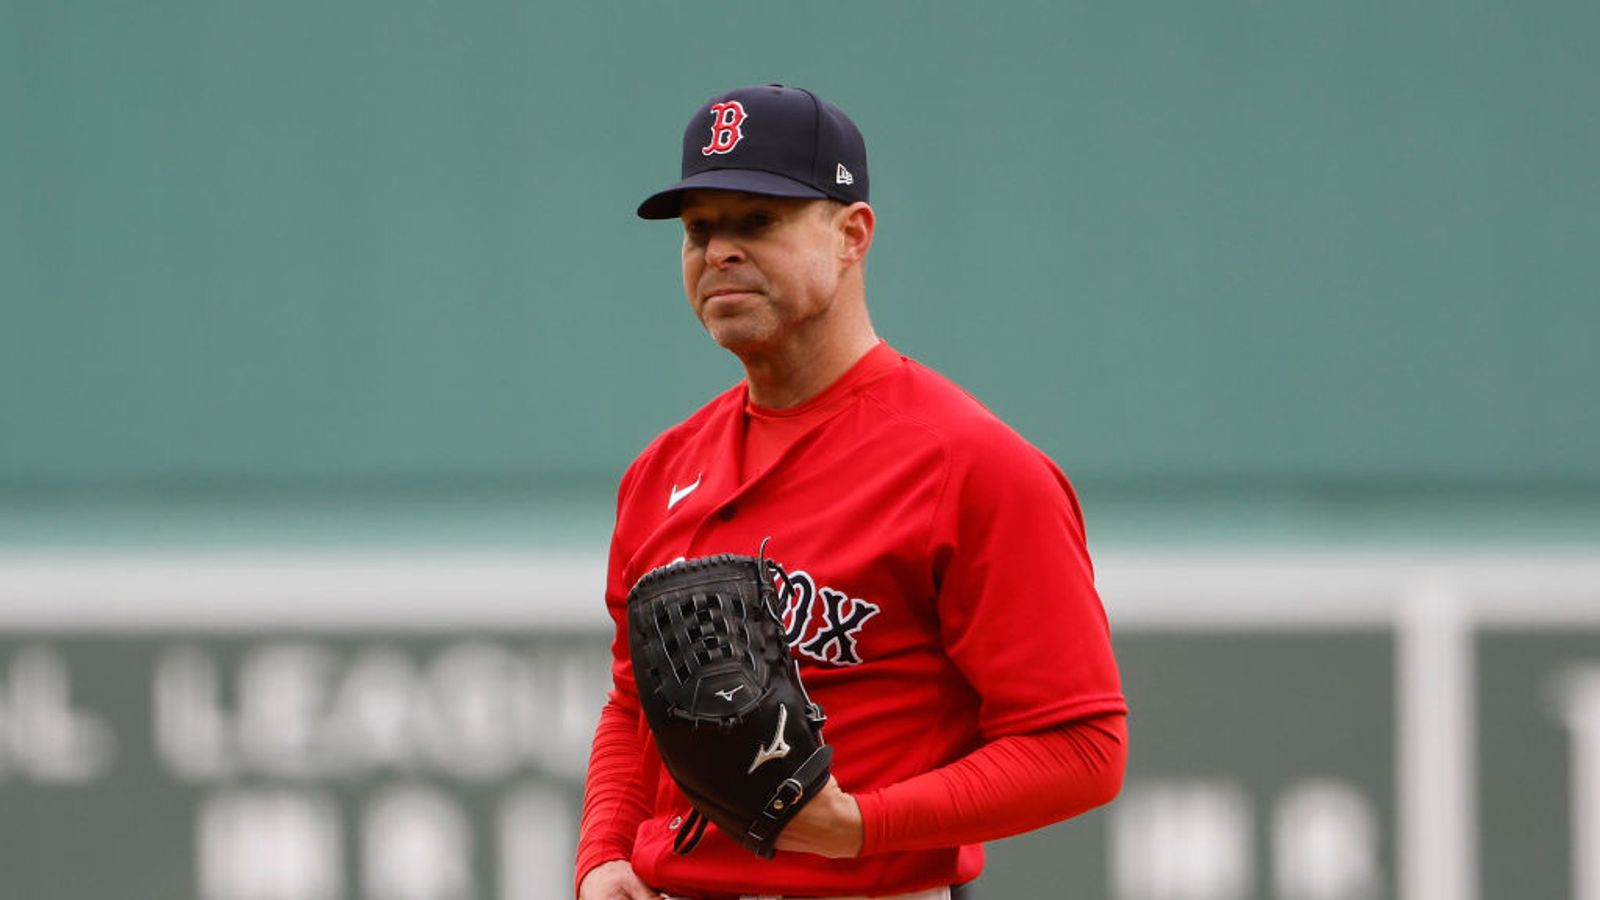 Relegated to the Boston Red Sox bullpen, struggles on the mound continue  for former Cy Young Award winner, Corey Kluber.